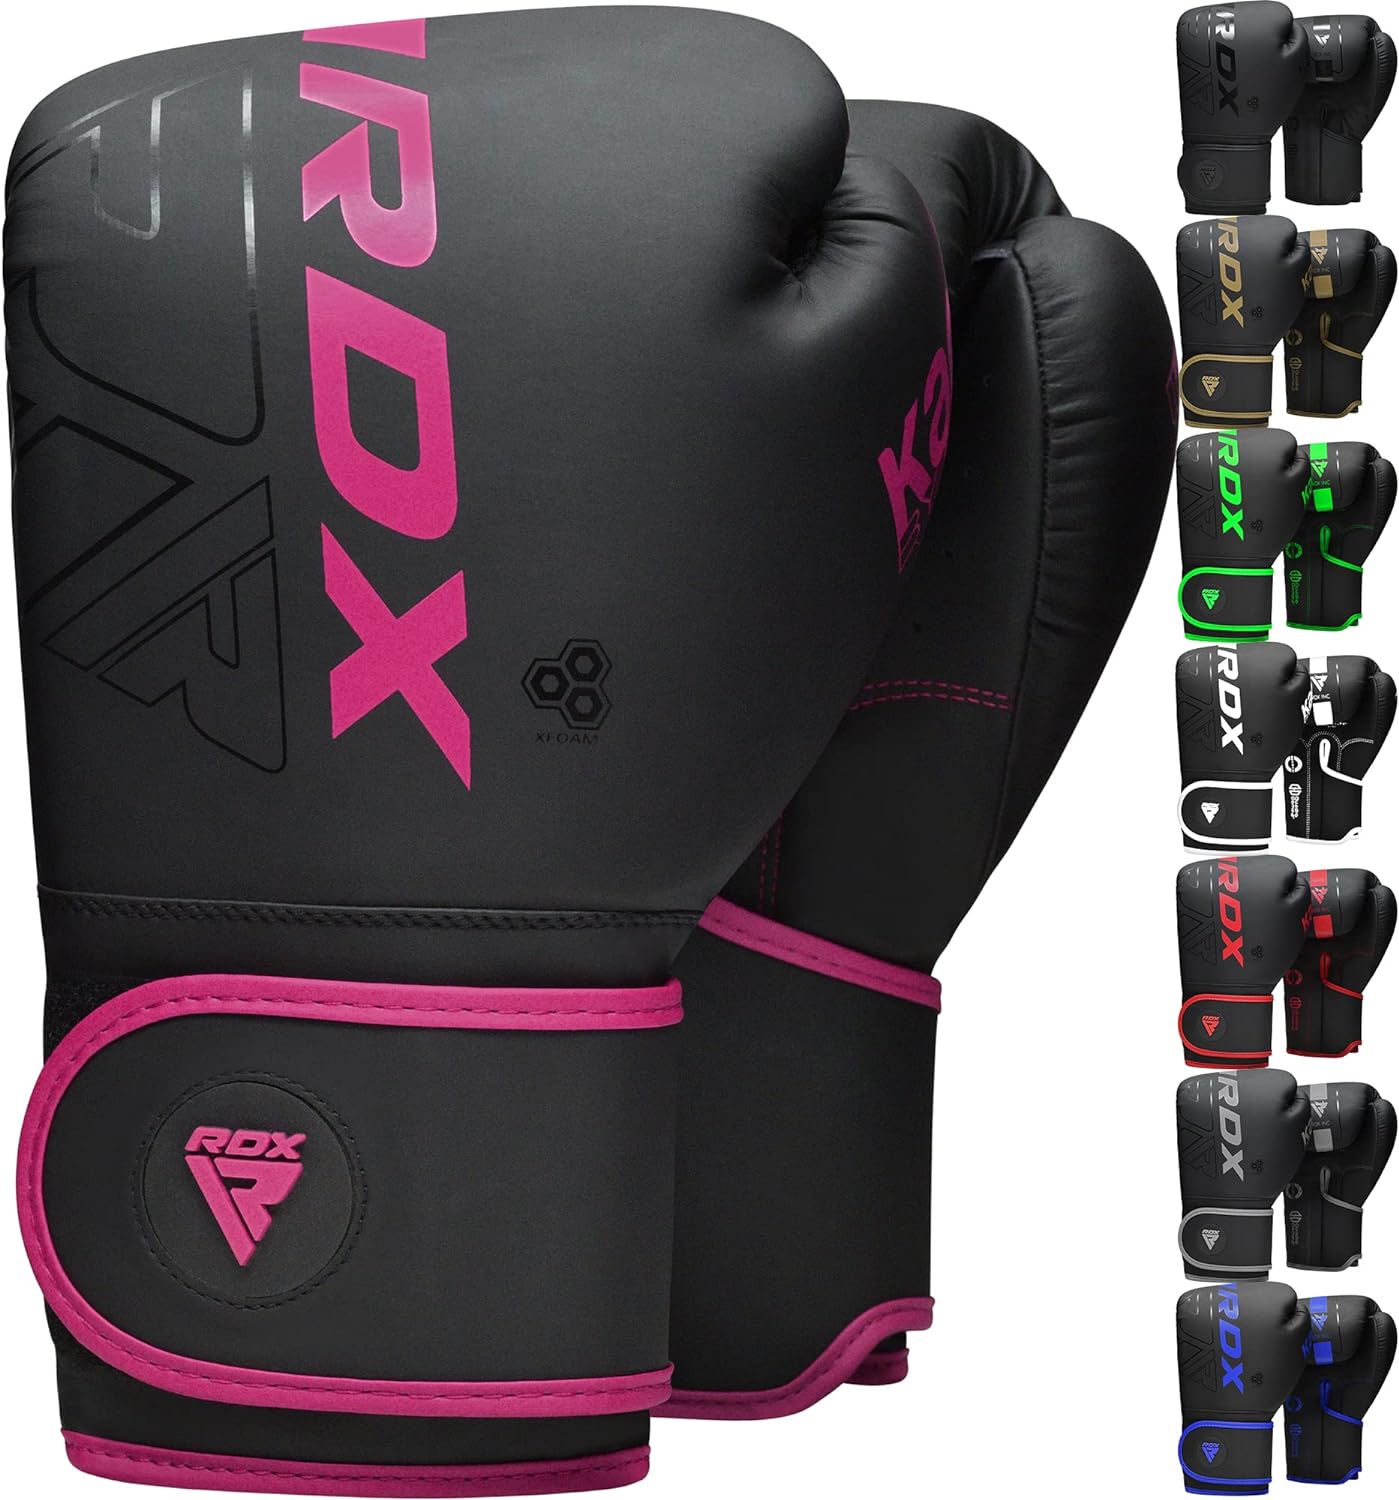 Eclipse Martial Art Supplies Training Gloves PINK / 12 OZ RDX Boxing Gloves Men Women, Pro Training Sparring, Maya Hide Leather Muay Thai MMA Kickboxing, Adult Heavy Punching Bag Gloves Mitts Focus Pad Workout, Ventilated Palm